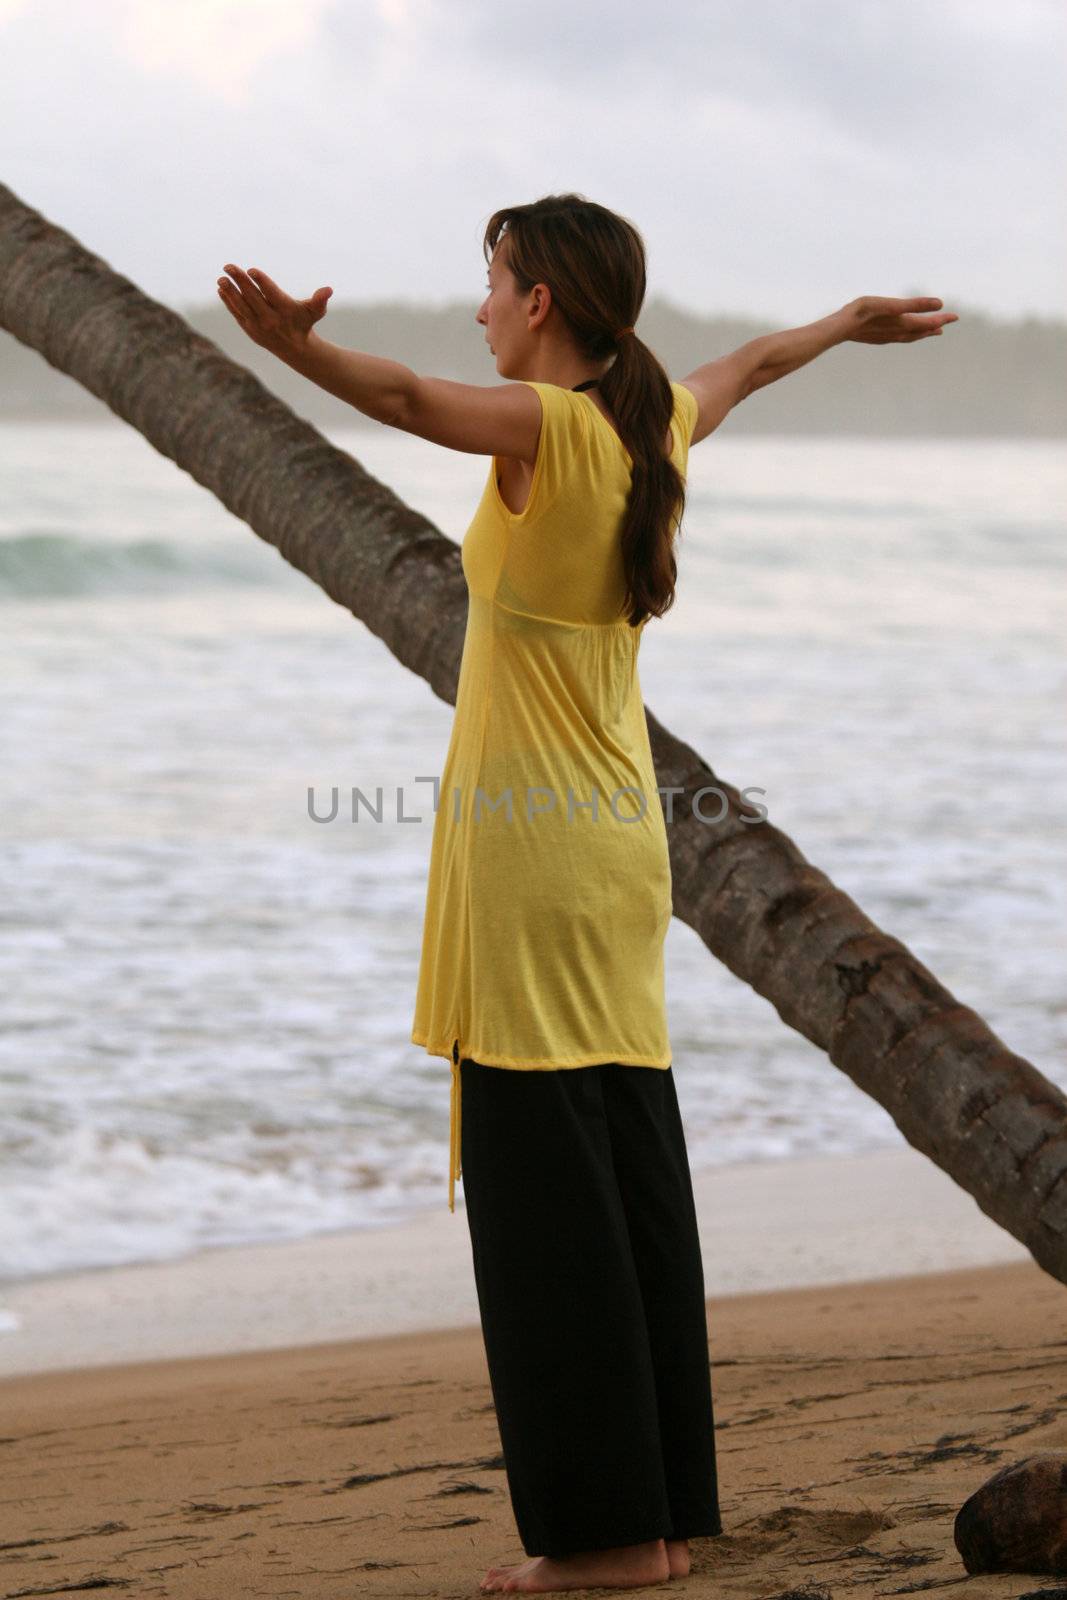 breath exercise and yoga on the beach by sunset